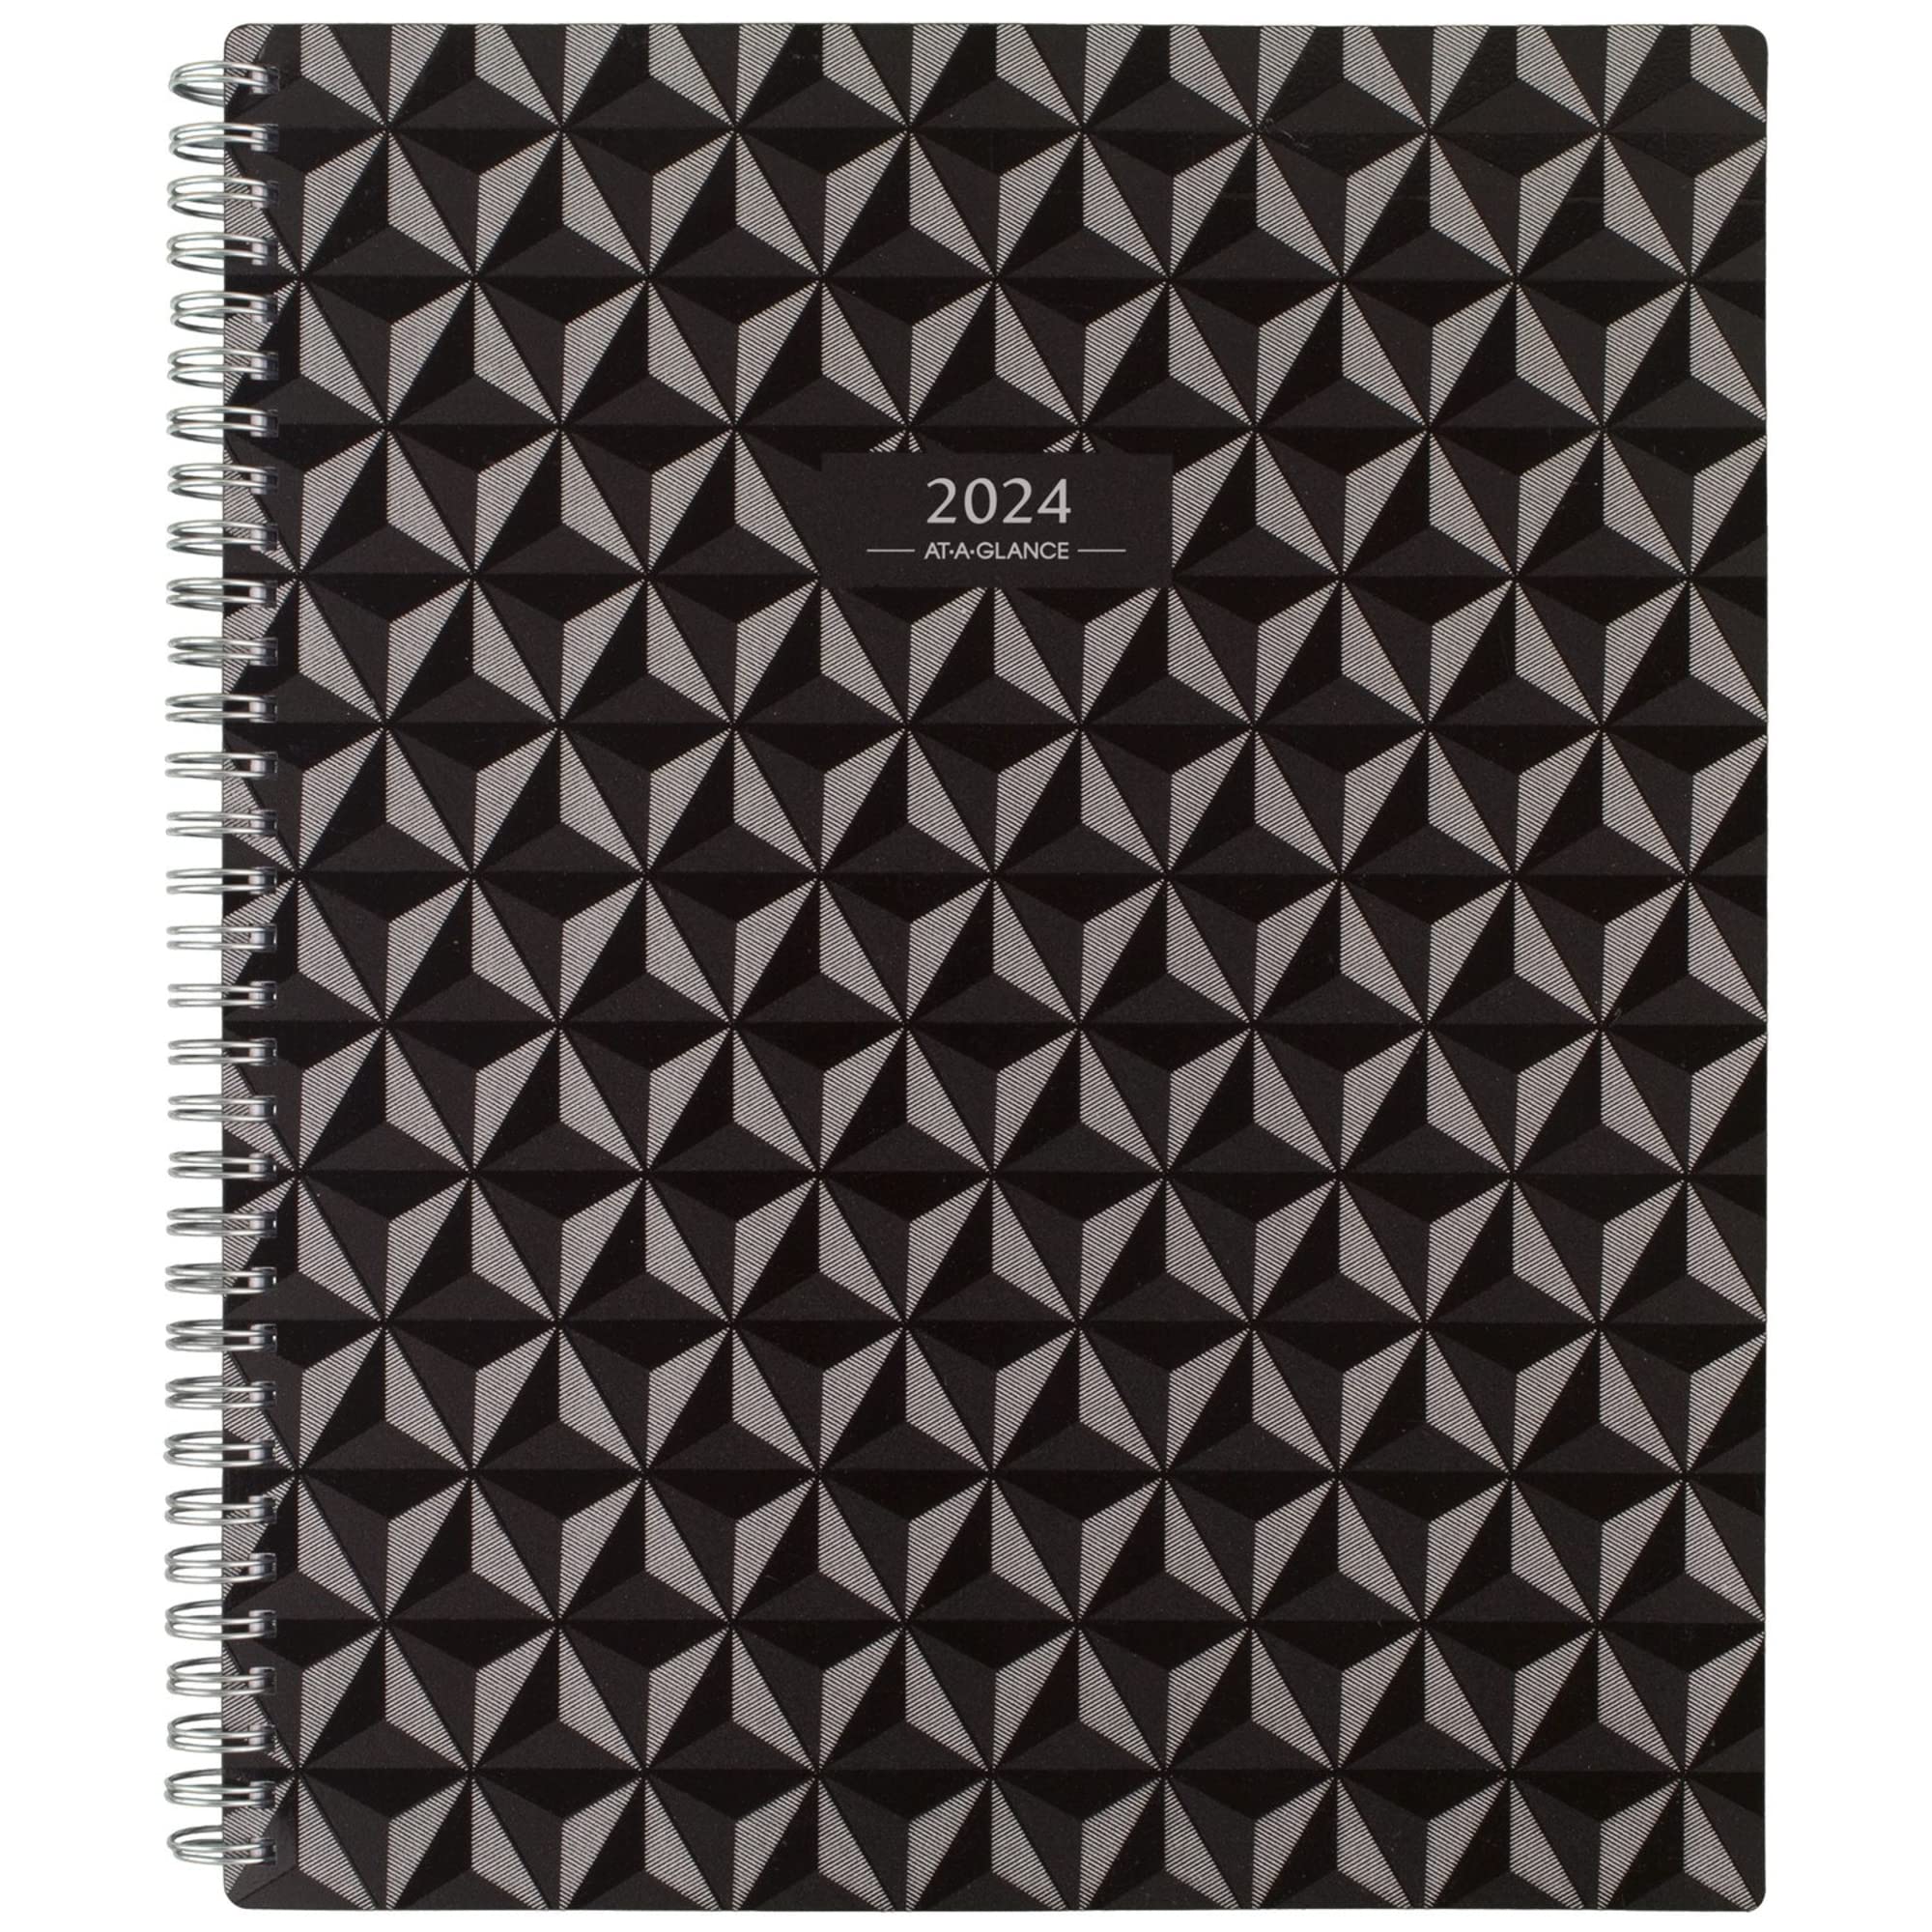 2024-2025 AT-A-GLANCE® Elevation Block-Format 13-Month Weekly/Monthly Planner, 8-1/2" x 11", Black, January 2024 to January 2025, 75950P05